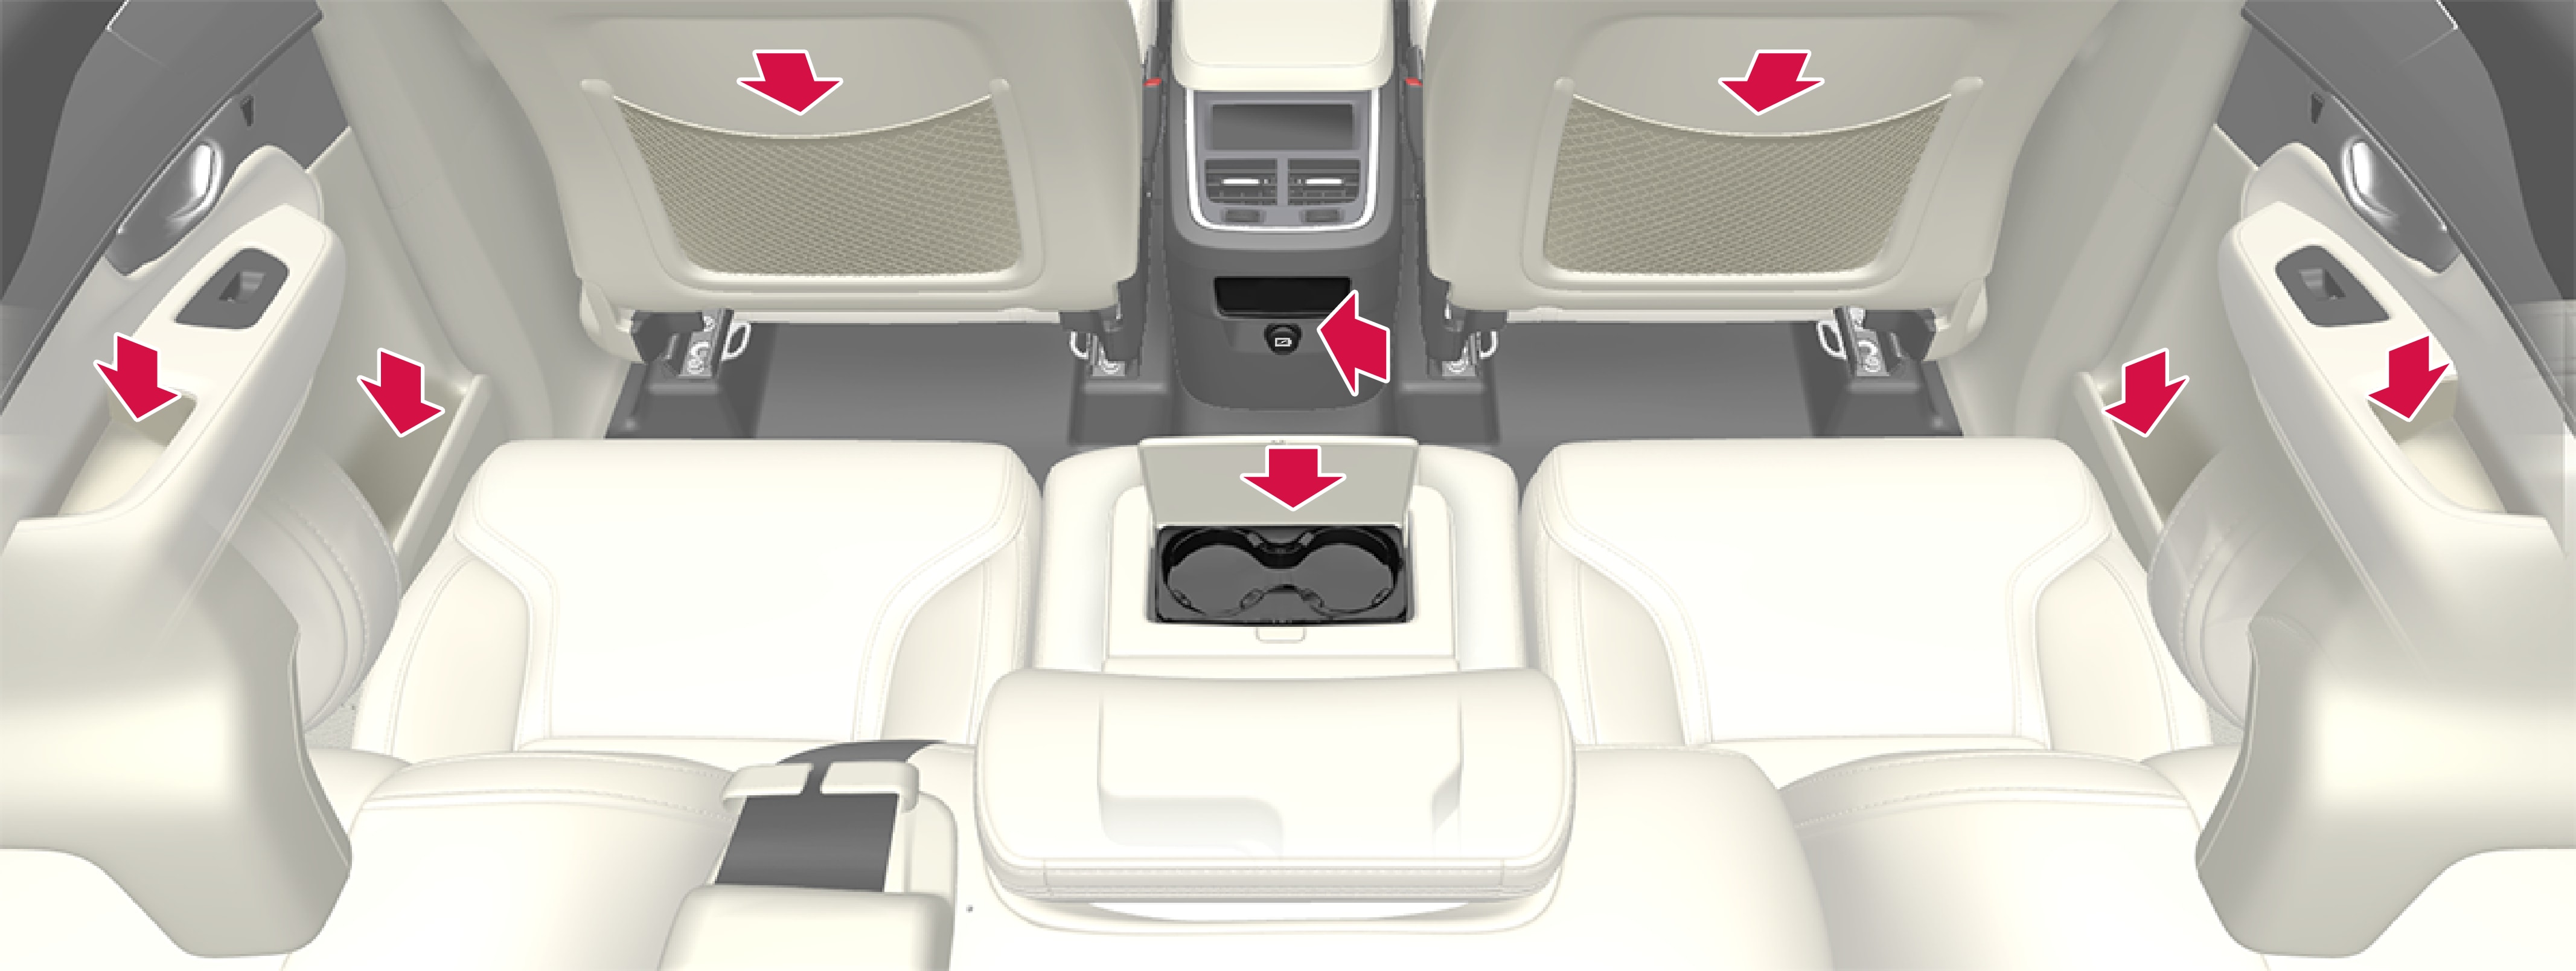 P5-2017–Interior–Overview 2nd seat row and tunnel console 7 seat